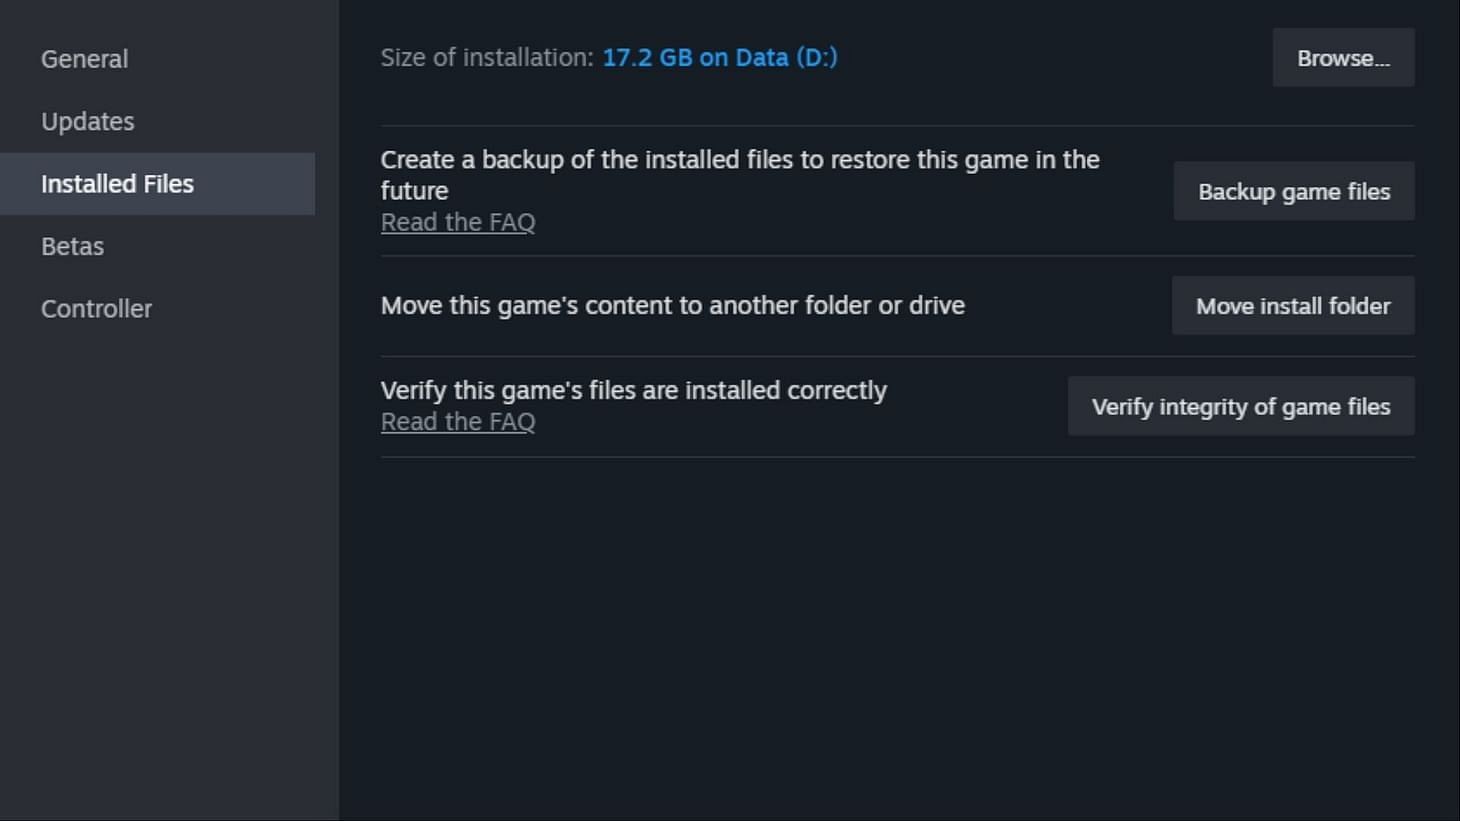 Verify the integrity of the game files( Image from Valve )